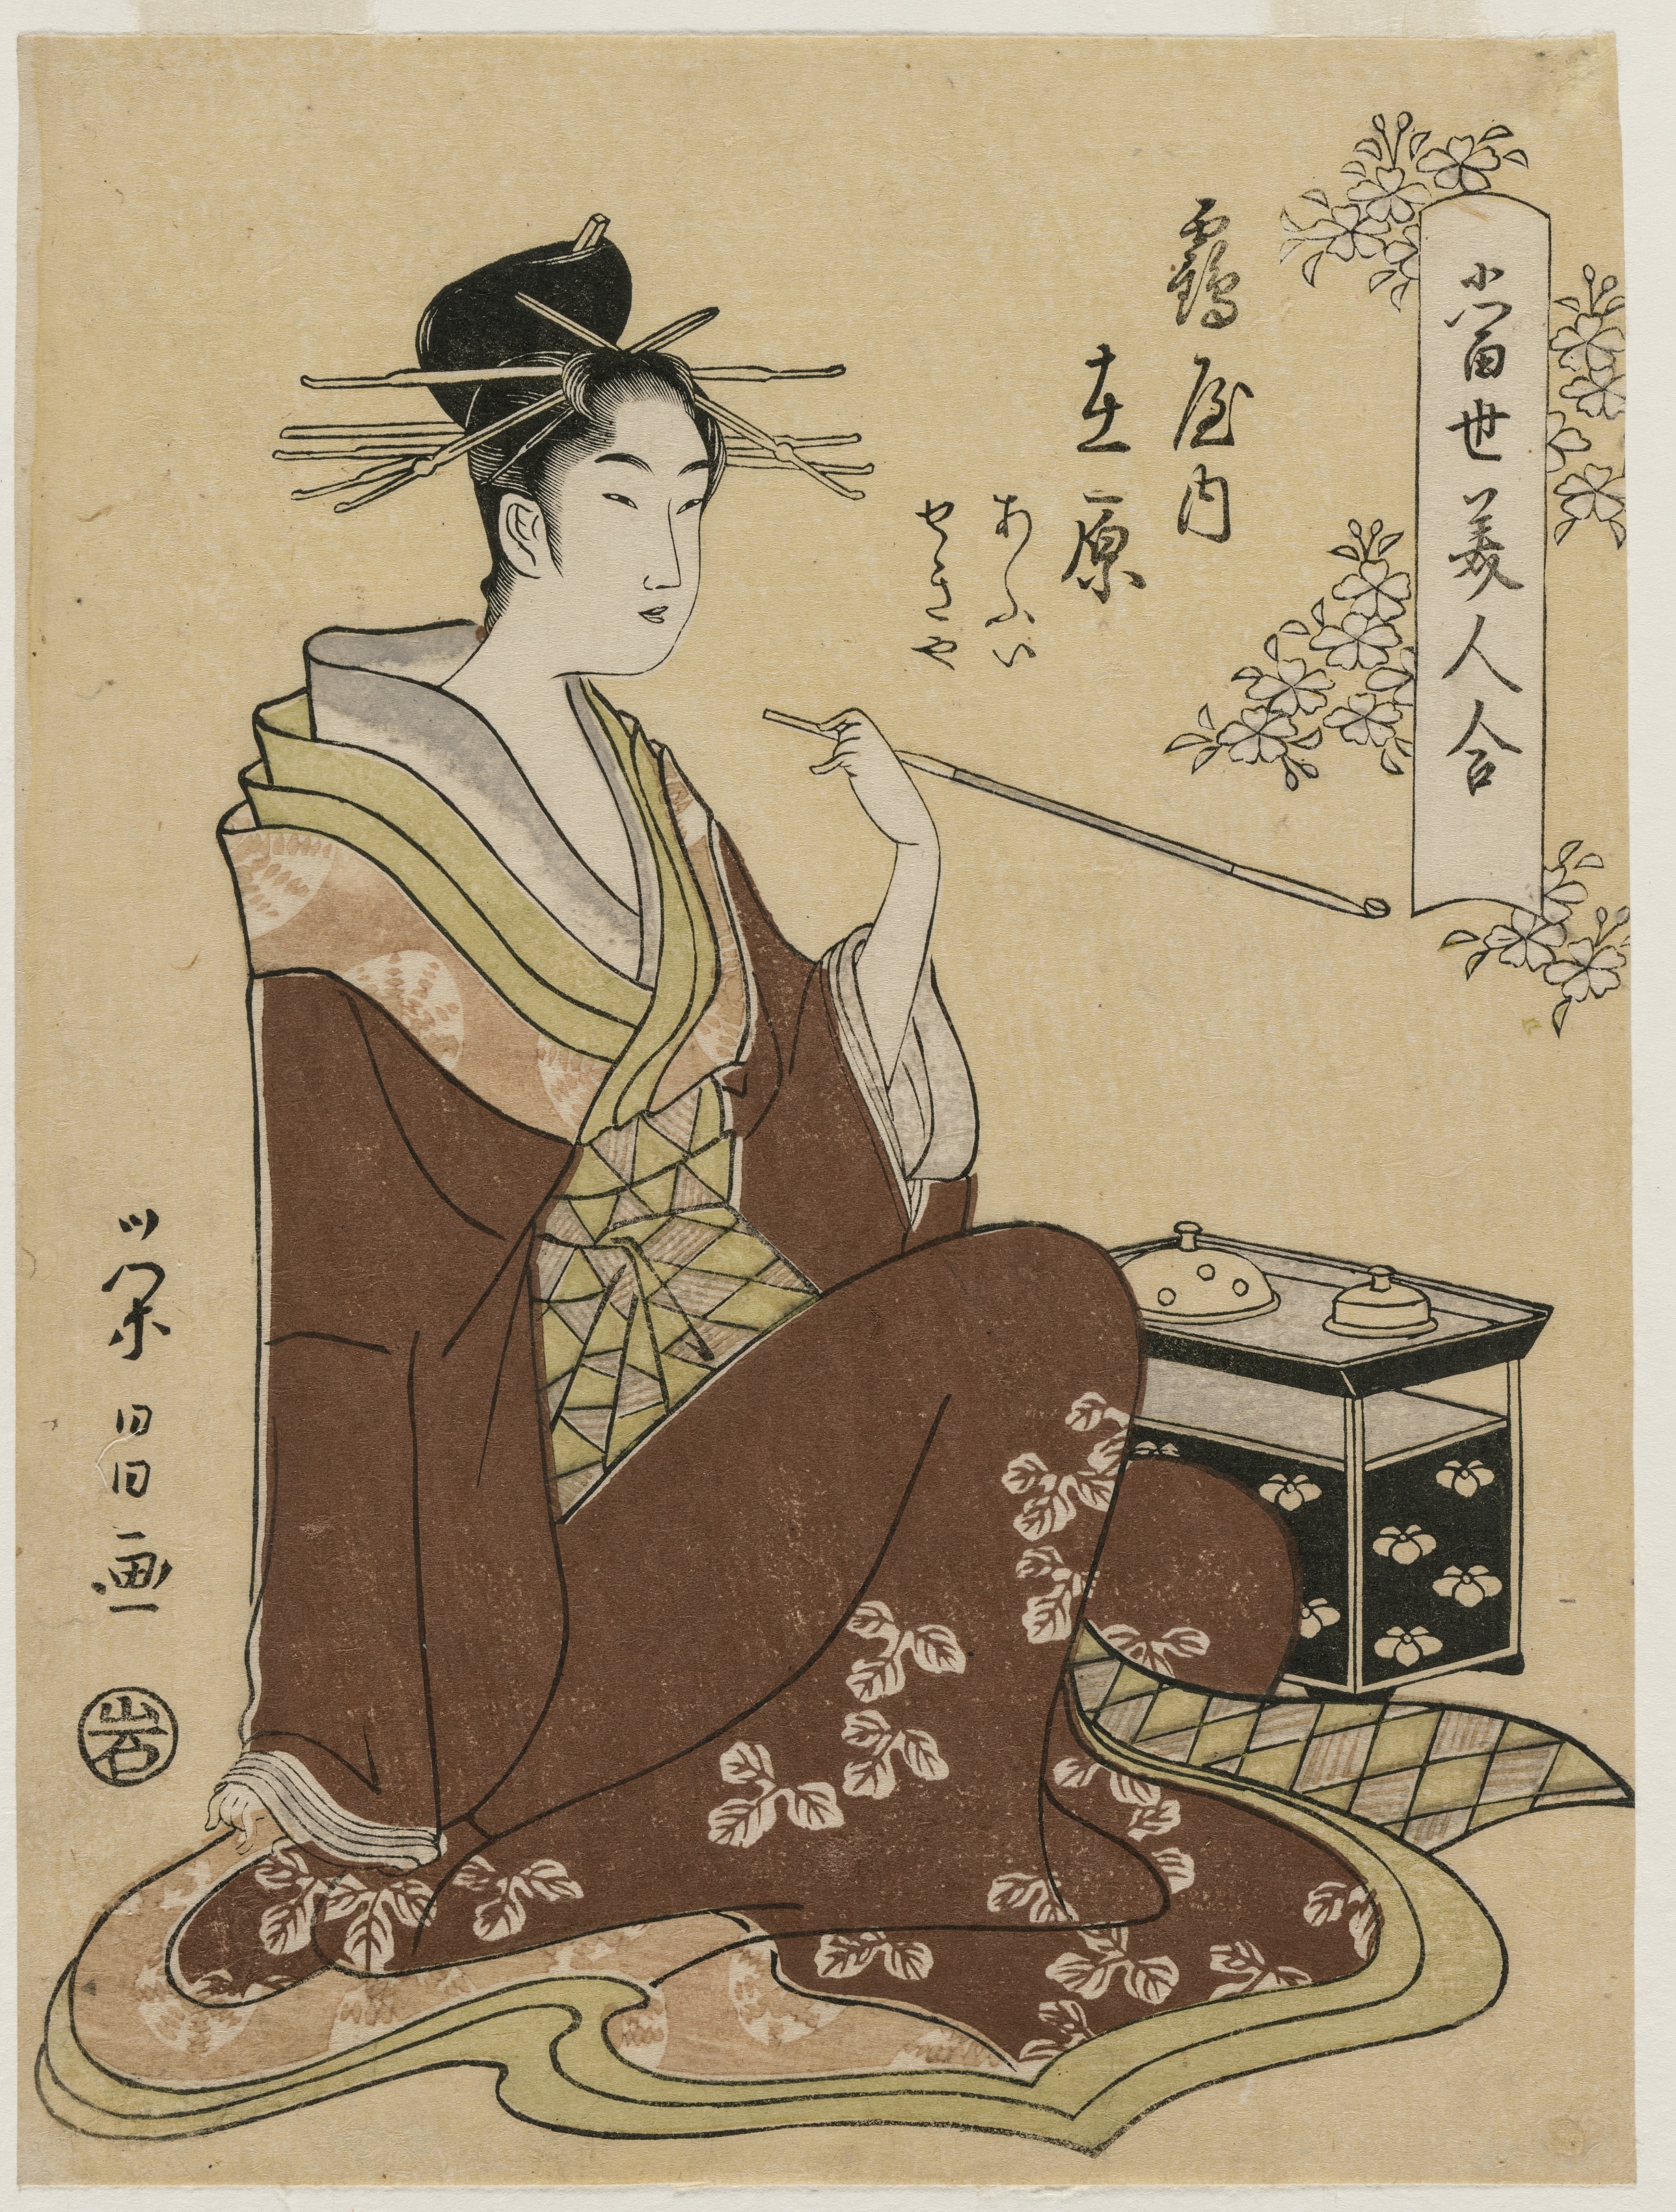 The Courtesan Ariwara of the Tsuruya Seated by a Smoking Chest (From the series A Collection of Modern Beauties)